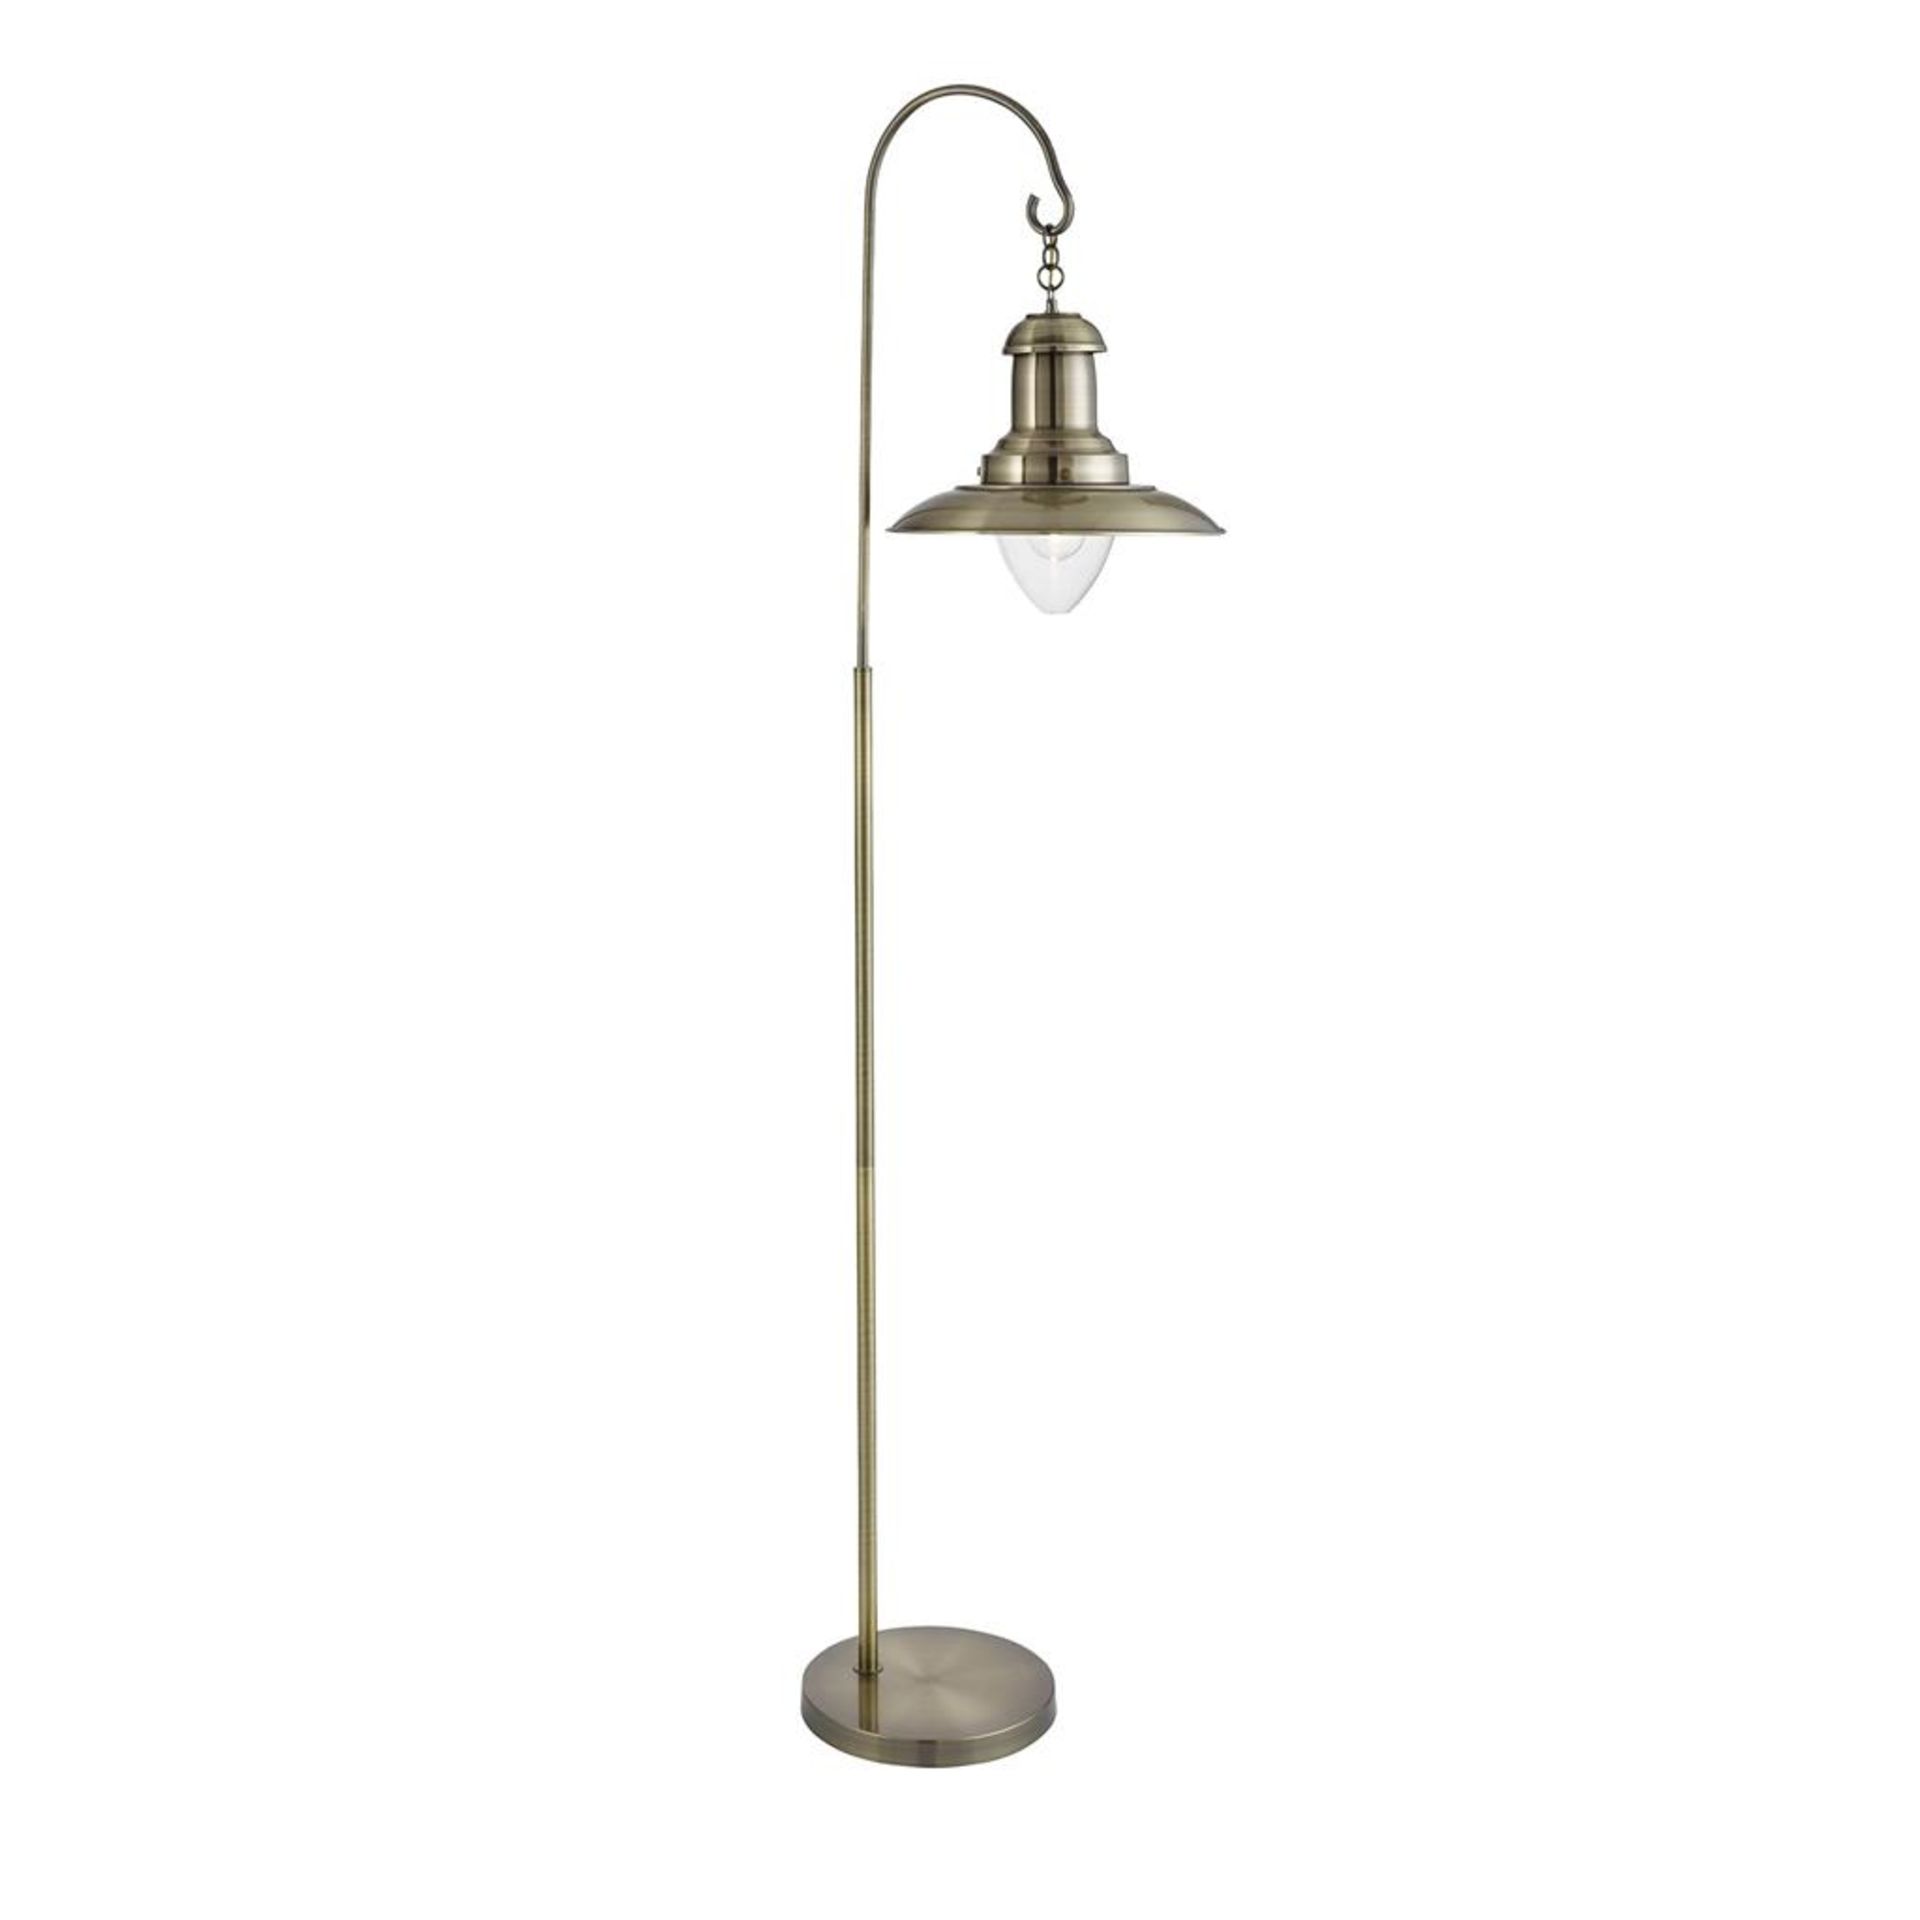 1 x Searchlight Fisherman Floor Lamp With an Antique Brass Finish and Glass Shade - Height 161 cms